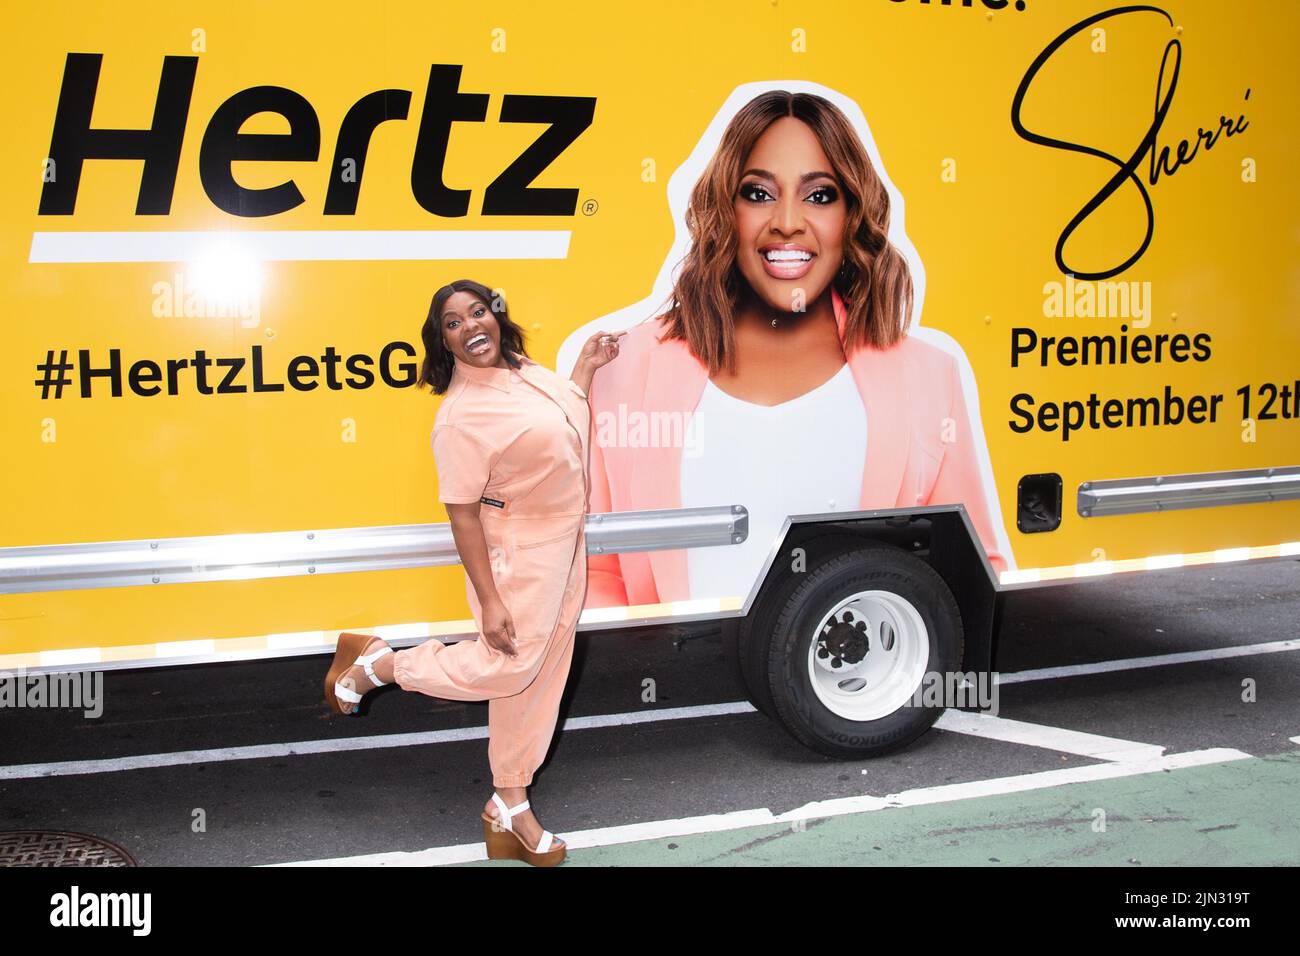 - New York - NY - 20220808 - Sherri Shepherd Celebrates New NYC Talk Show With Hertz Movers Hertz Midtown, NY - Sherri Shepherd - Janet Mayer/Startraksphoto.com -   -  This is an editorial, rights-managed image. Please contact  INSTAR Images  for licensing fee and rights information at sales@instarimages.com or call +1 212 414 0207. This image may not be published in any way that is, or might be deemed to be, defamatory, libelous, pornographic, or obscene. Please consult our sales department for any clarification needed prior to publication and use. INSTAR Images reserves the right to pursue u Stock Photo